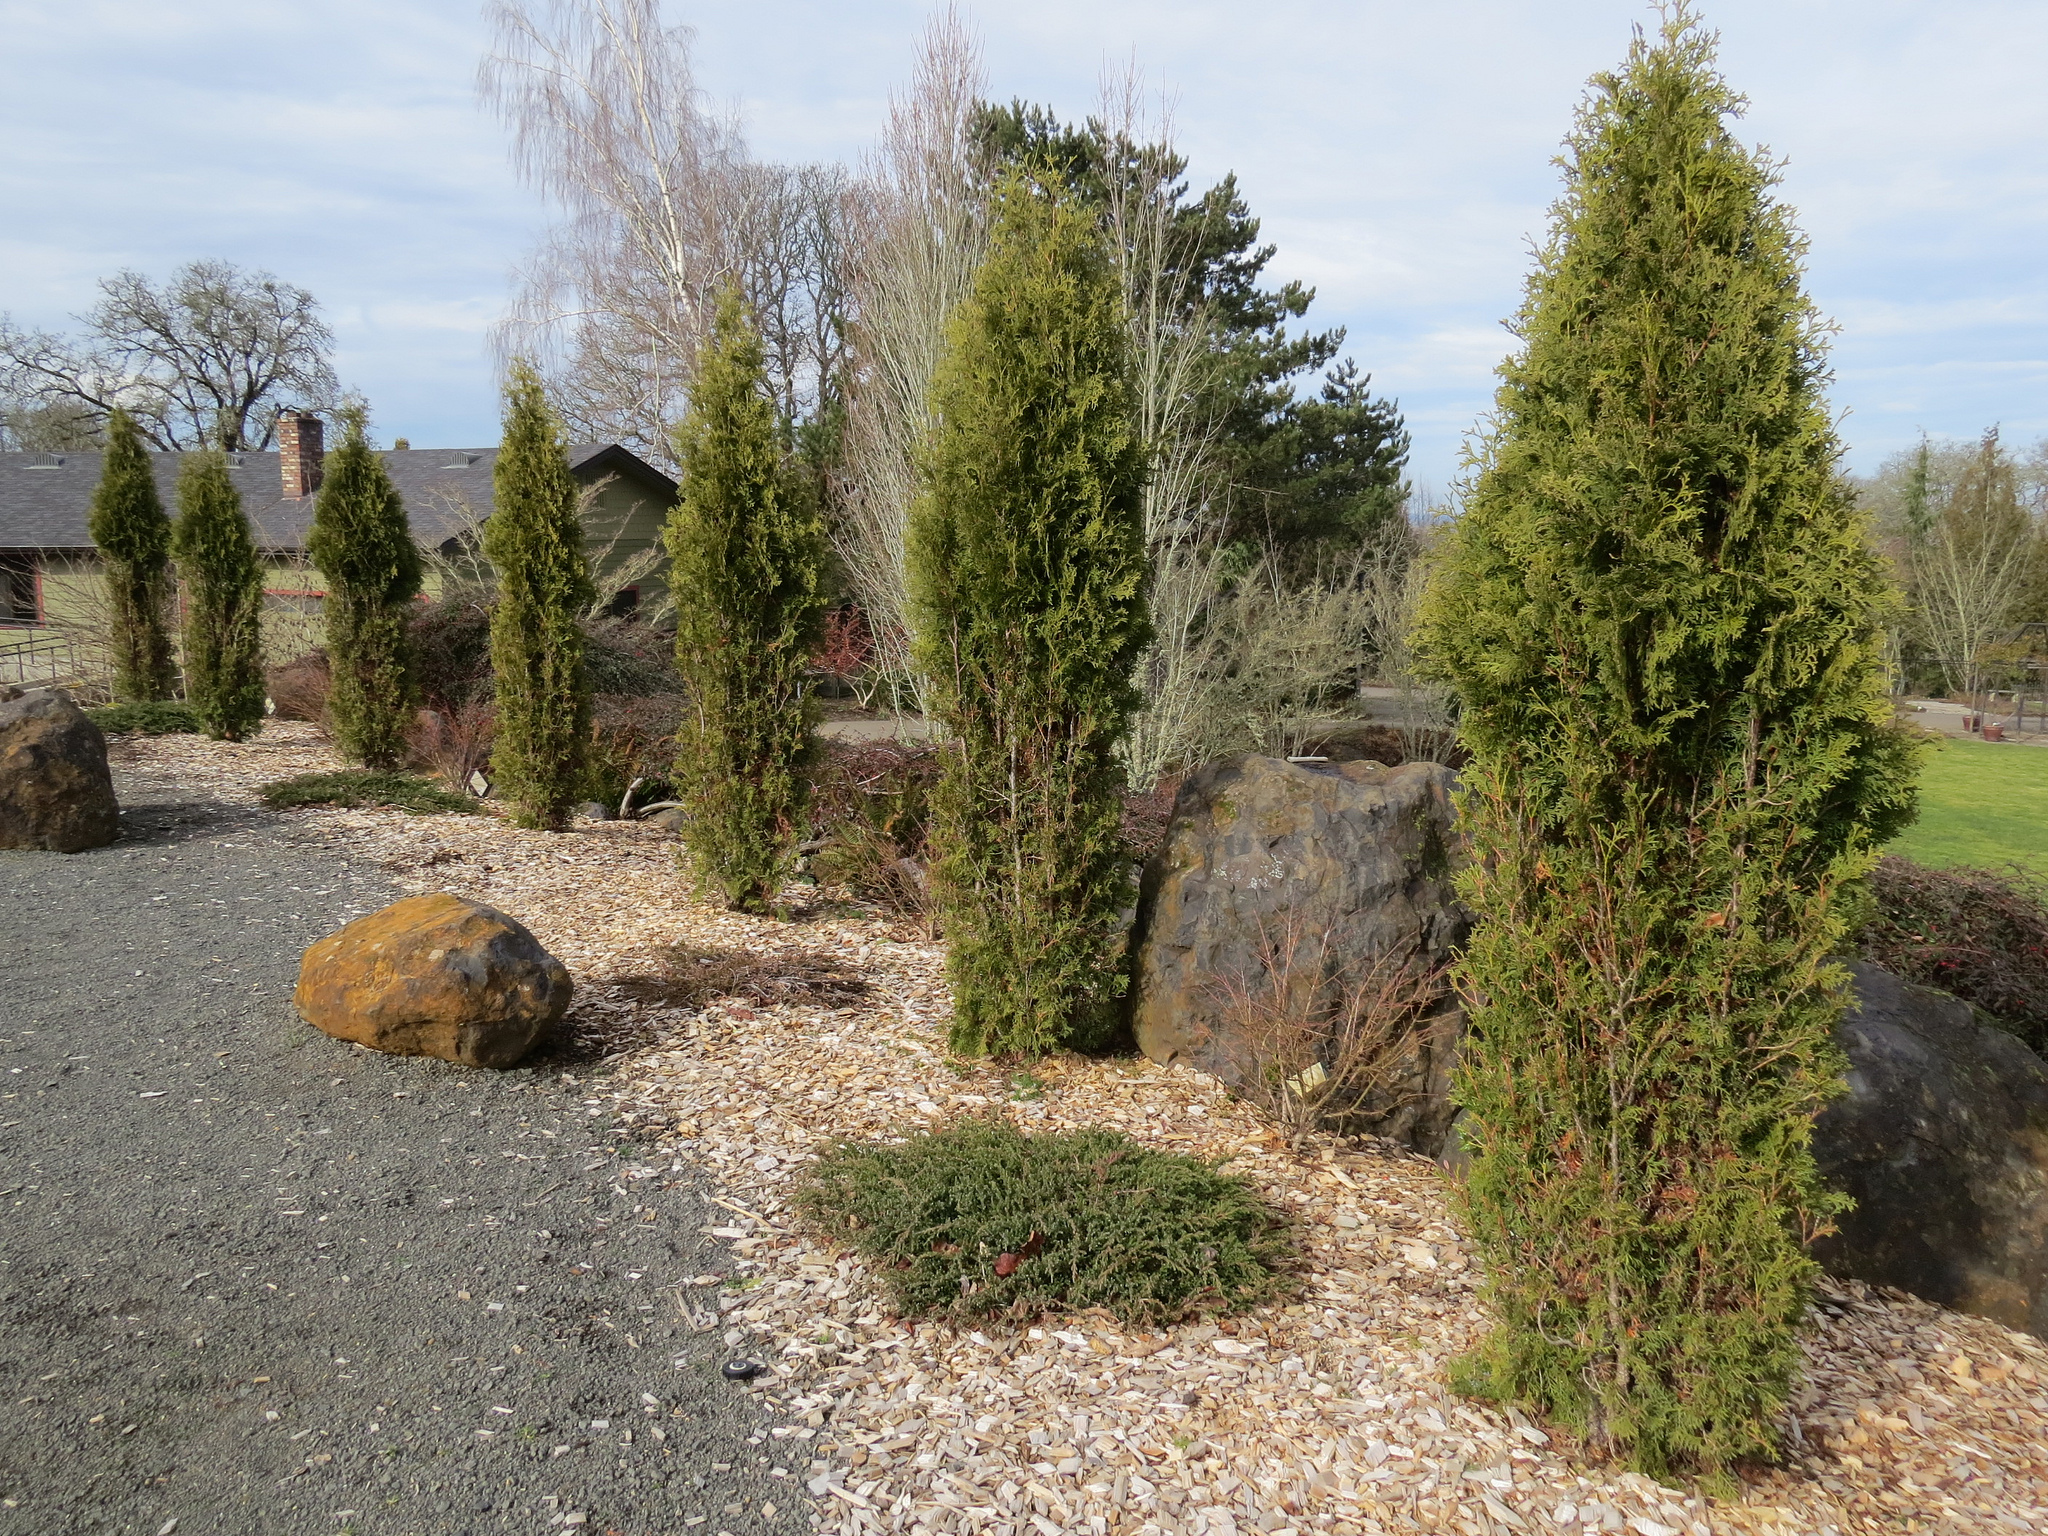 Arborvitae stands tall as a low-maintenance hedge